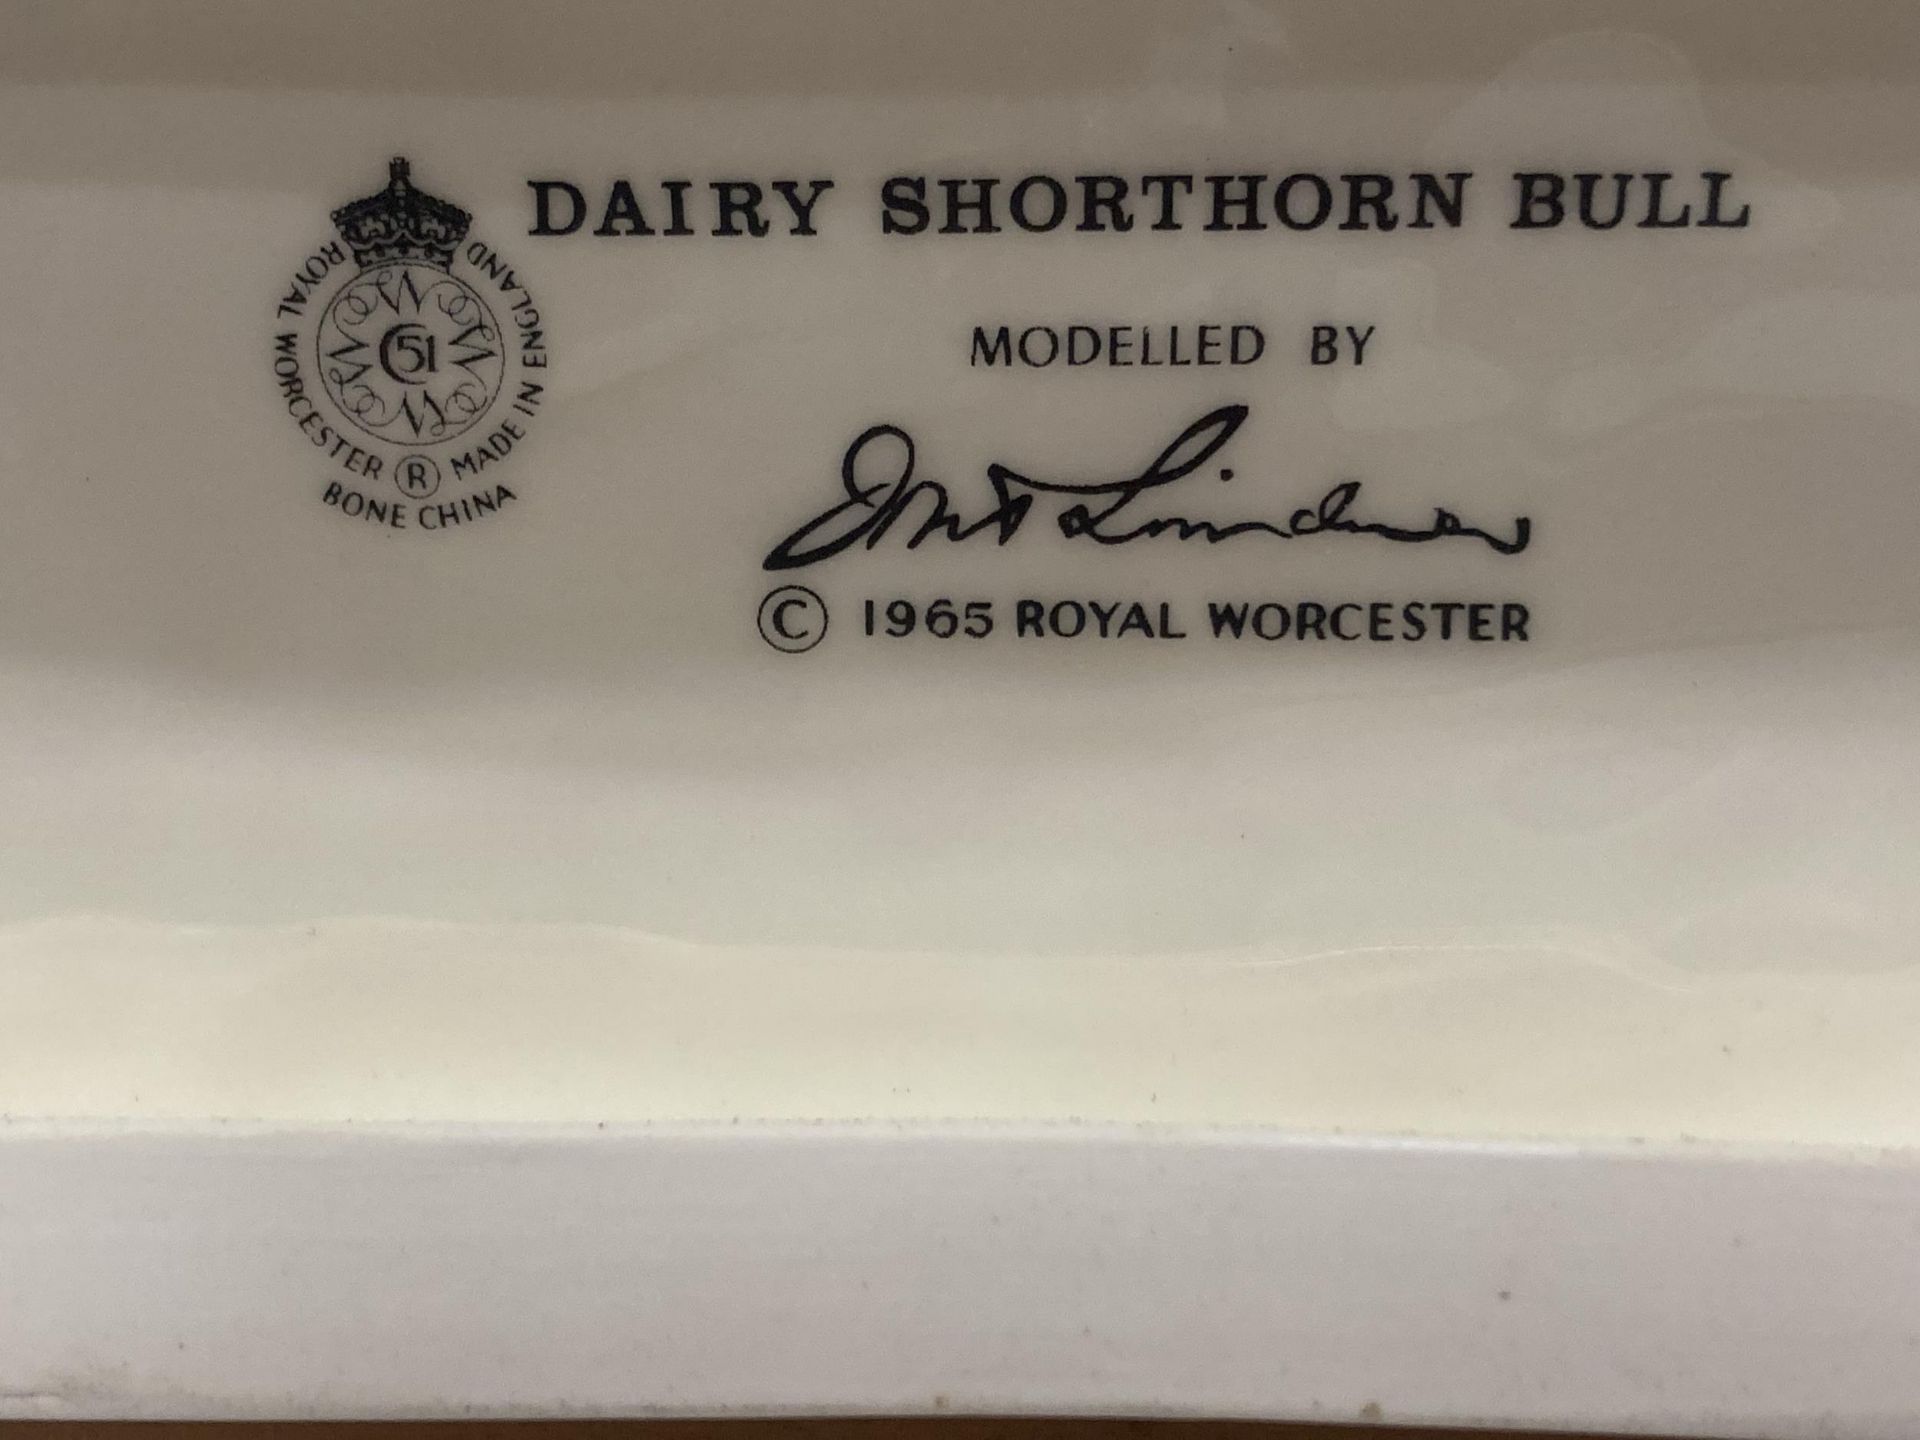 A ROYAL WORCESTER MODEL OF A DAIRY SHORTHORN BULL MODELLED BY DORIS LINDNER PRODUCED IN A LIMITED - Image 5 of 5